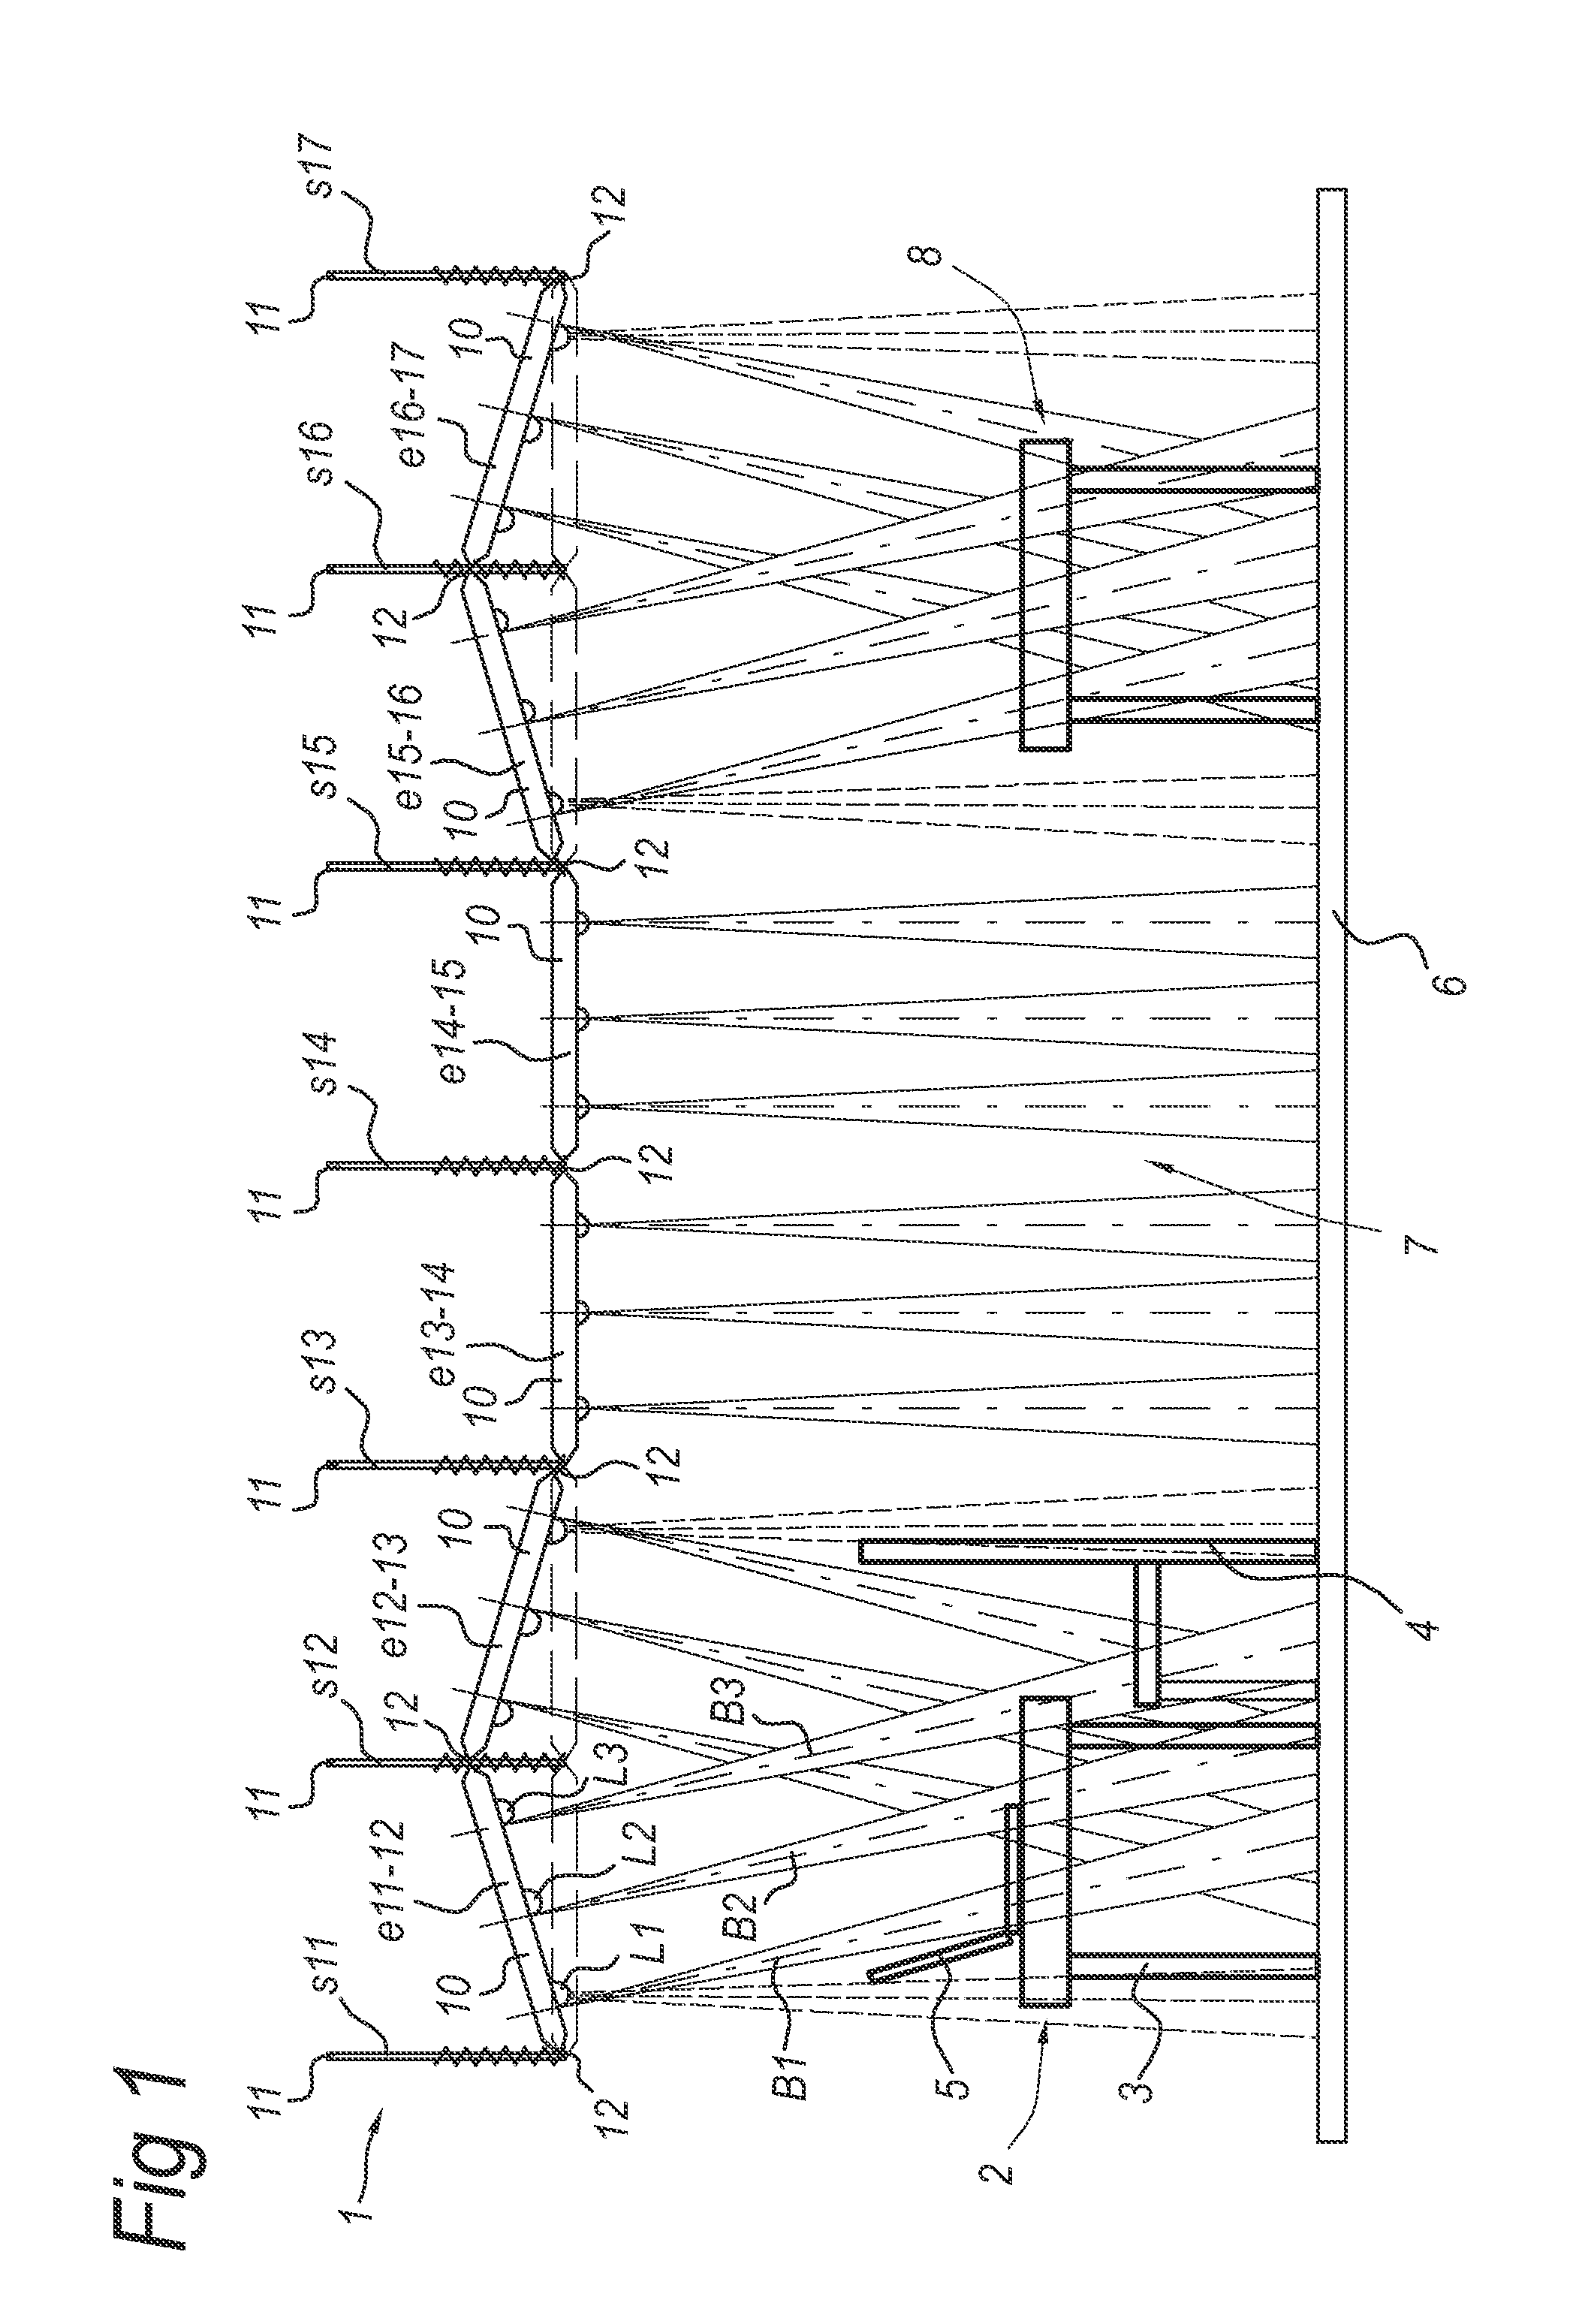 Lighting system, space with a lighting system, and method of providing an illumination profile using such a lighting system